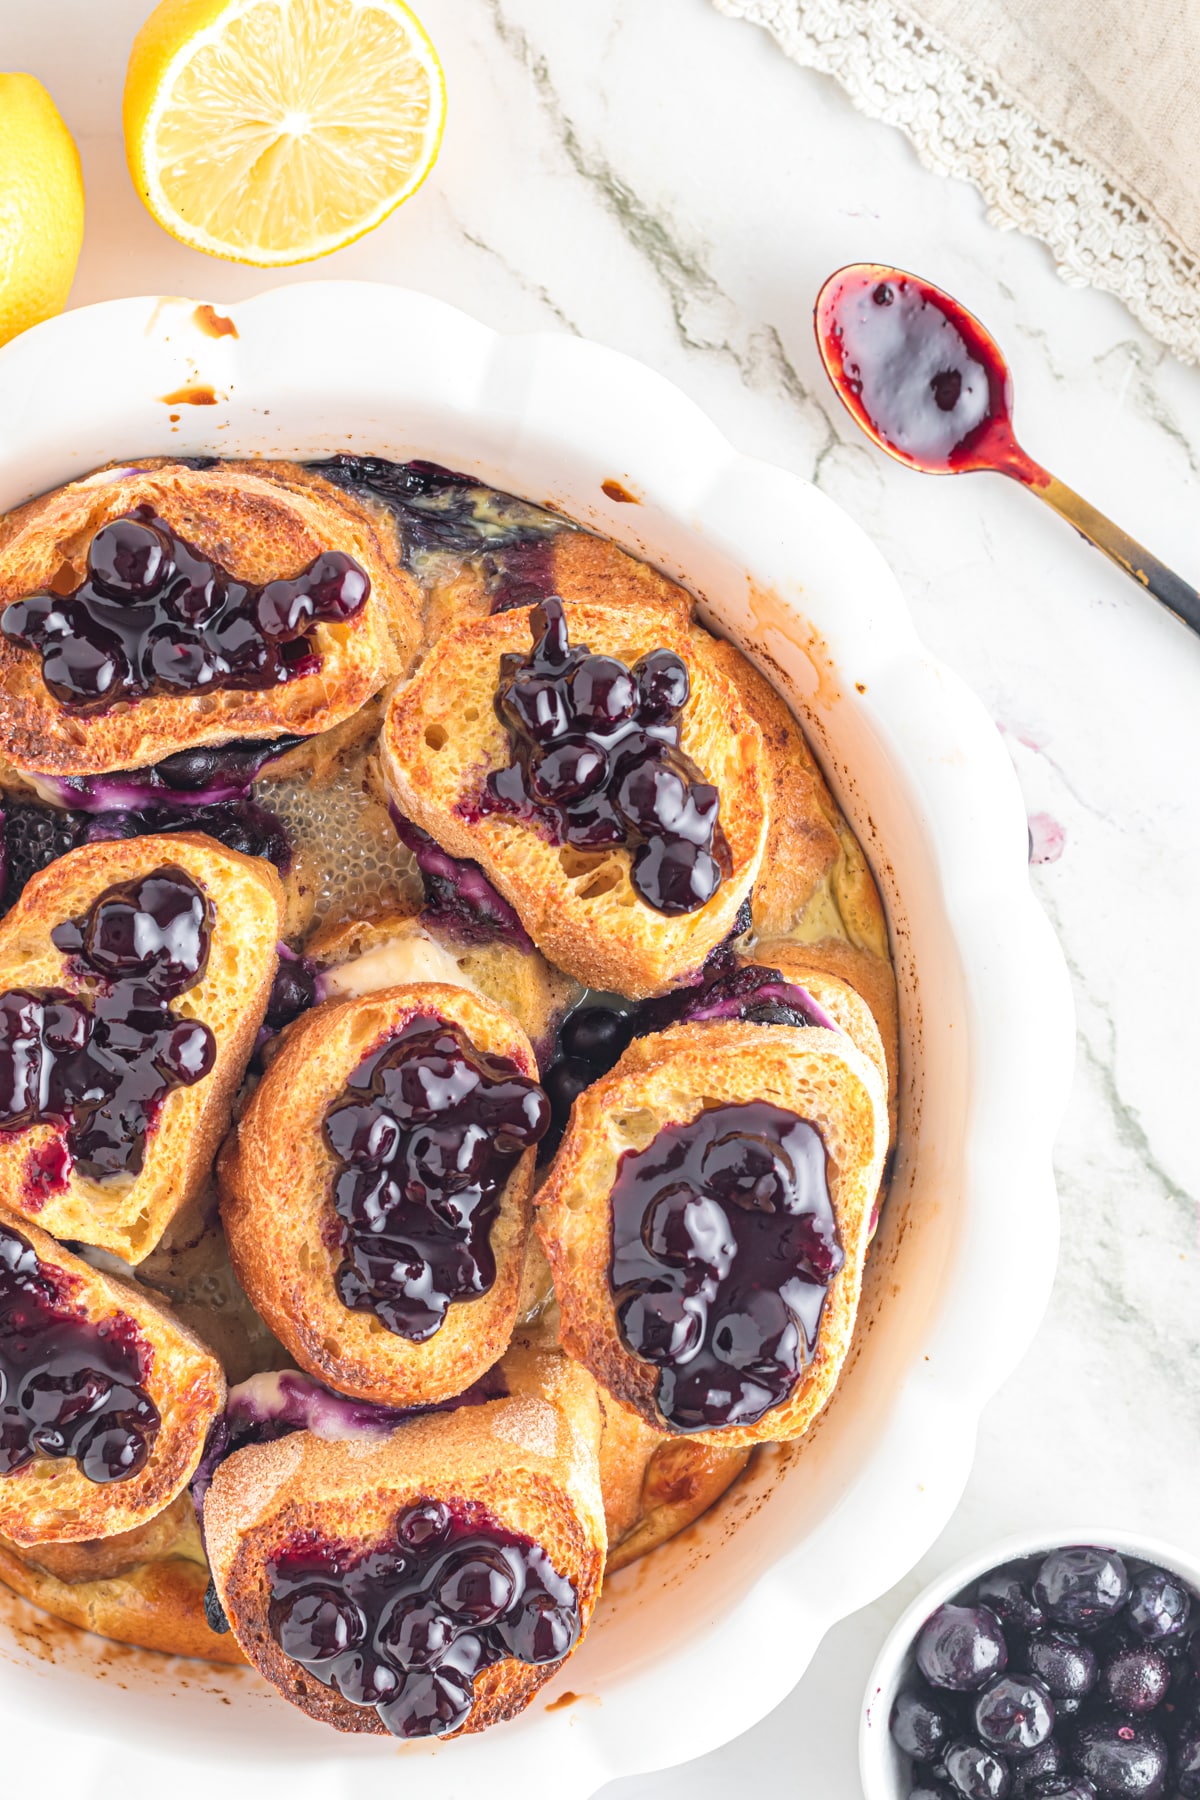 Blueberry French toast in white baking dish on table.
